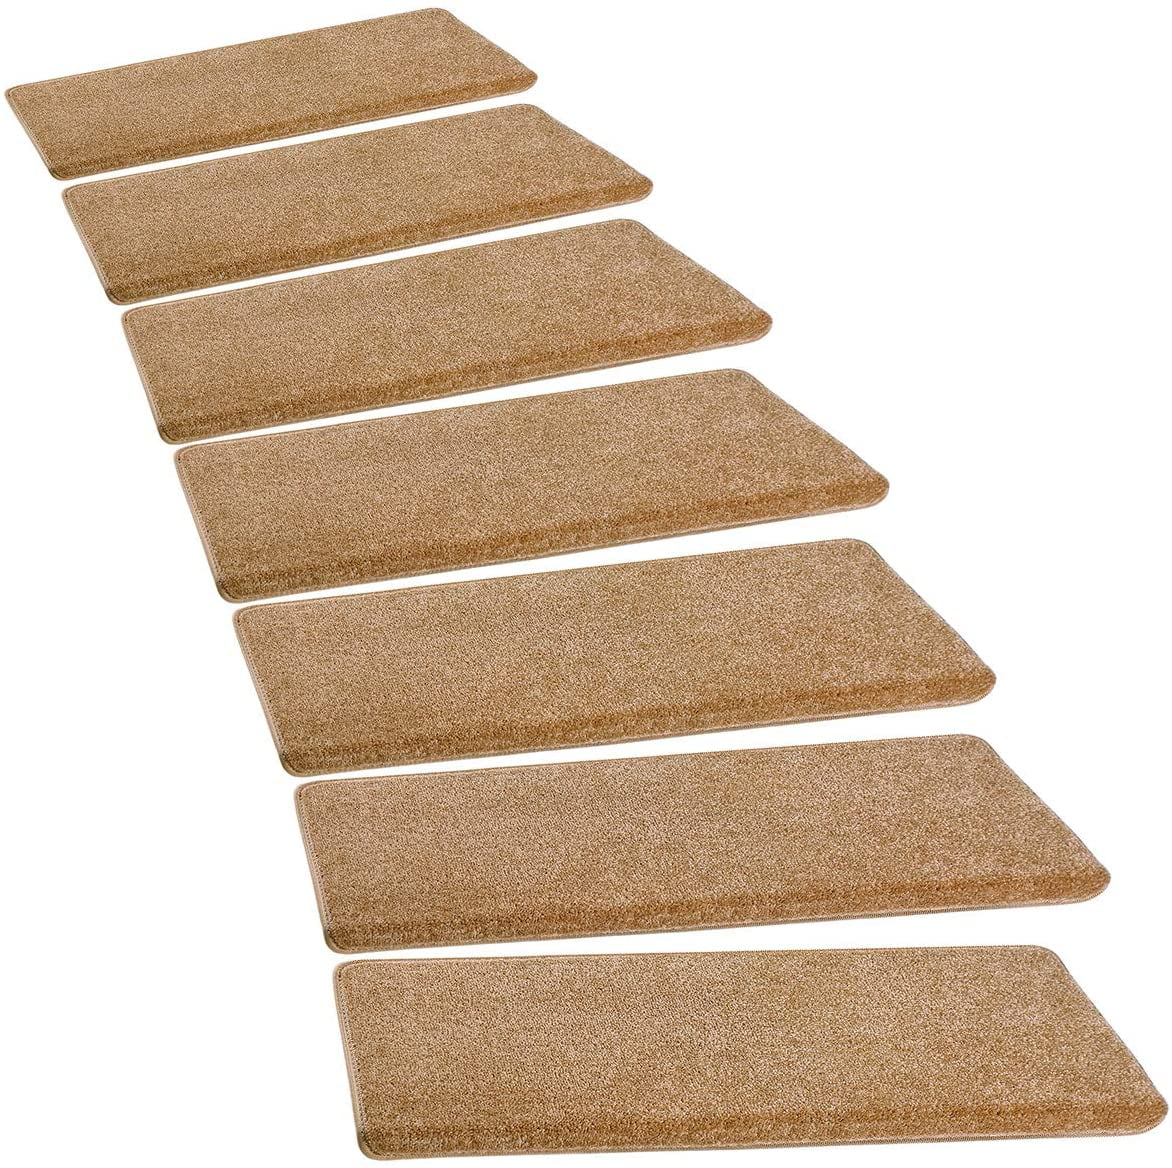 Carpet Stair Case Pads 14 Carpet Stair case Treads Twisty Black Stain Free 